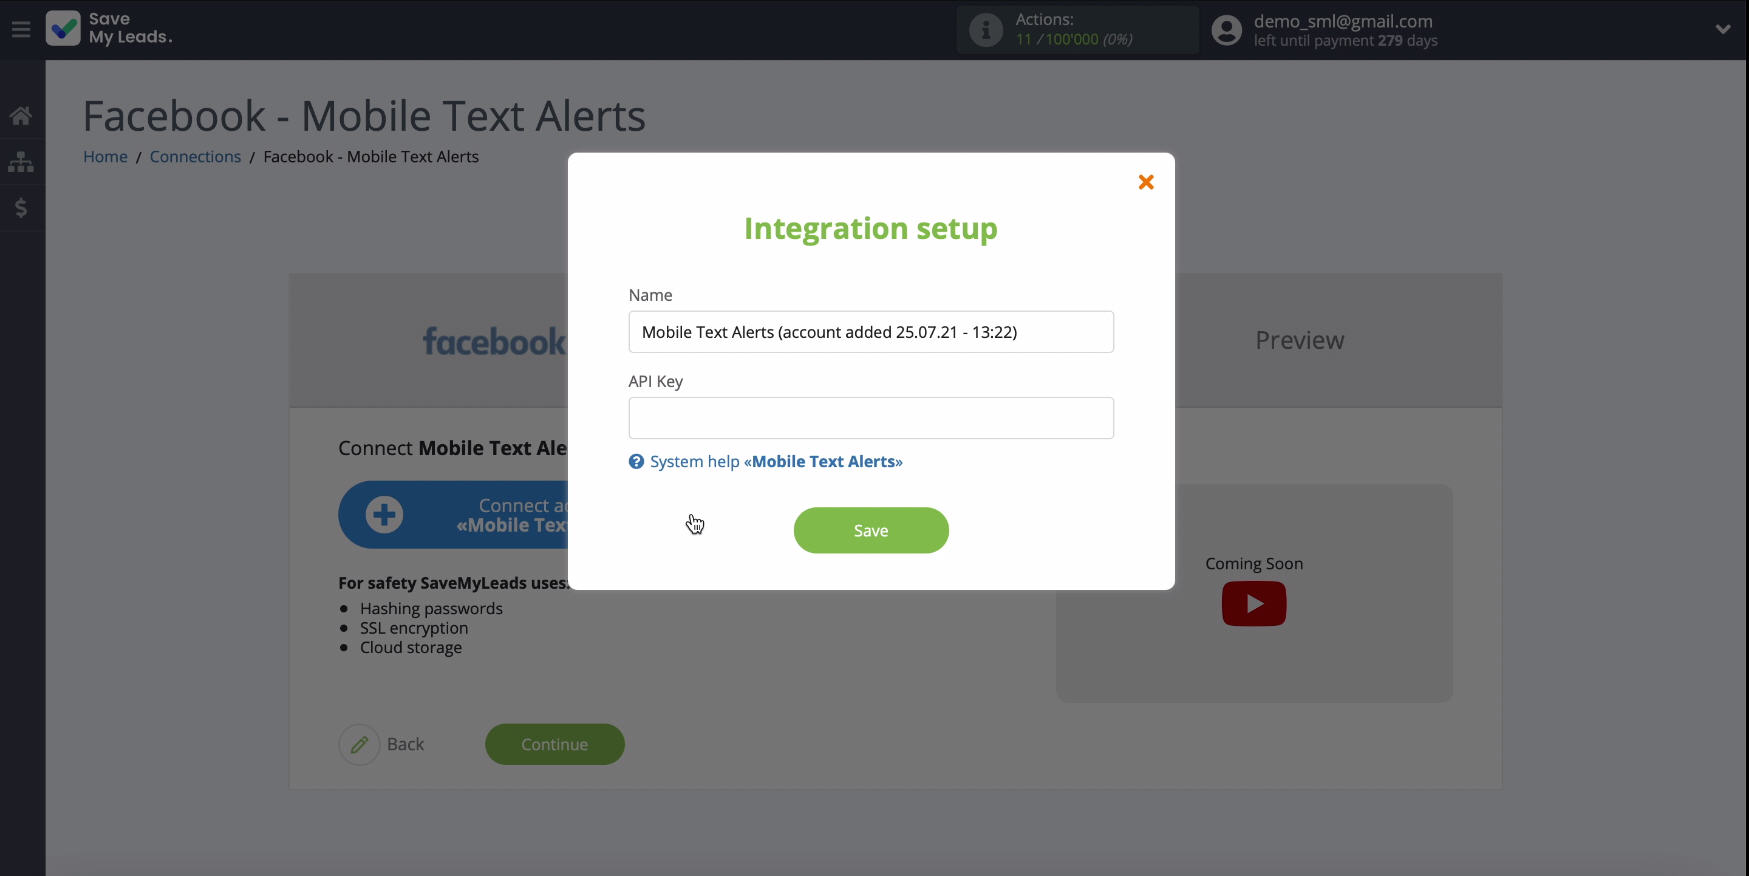 Facebook and Mobile Text Alerts integration | Connection window